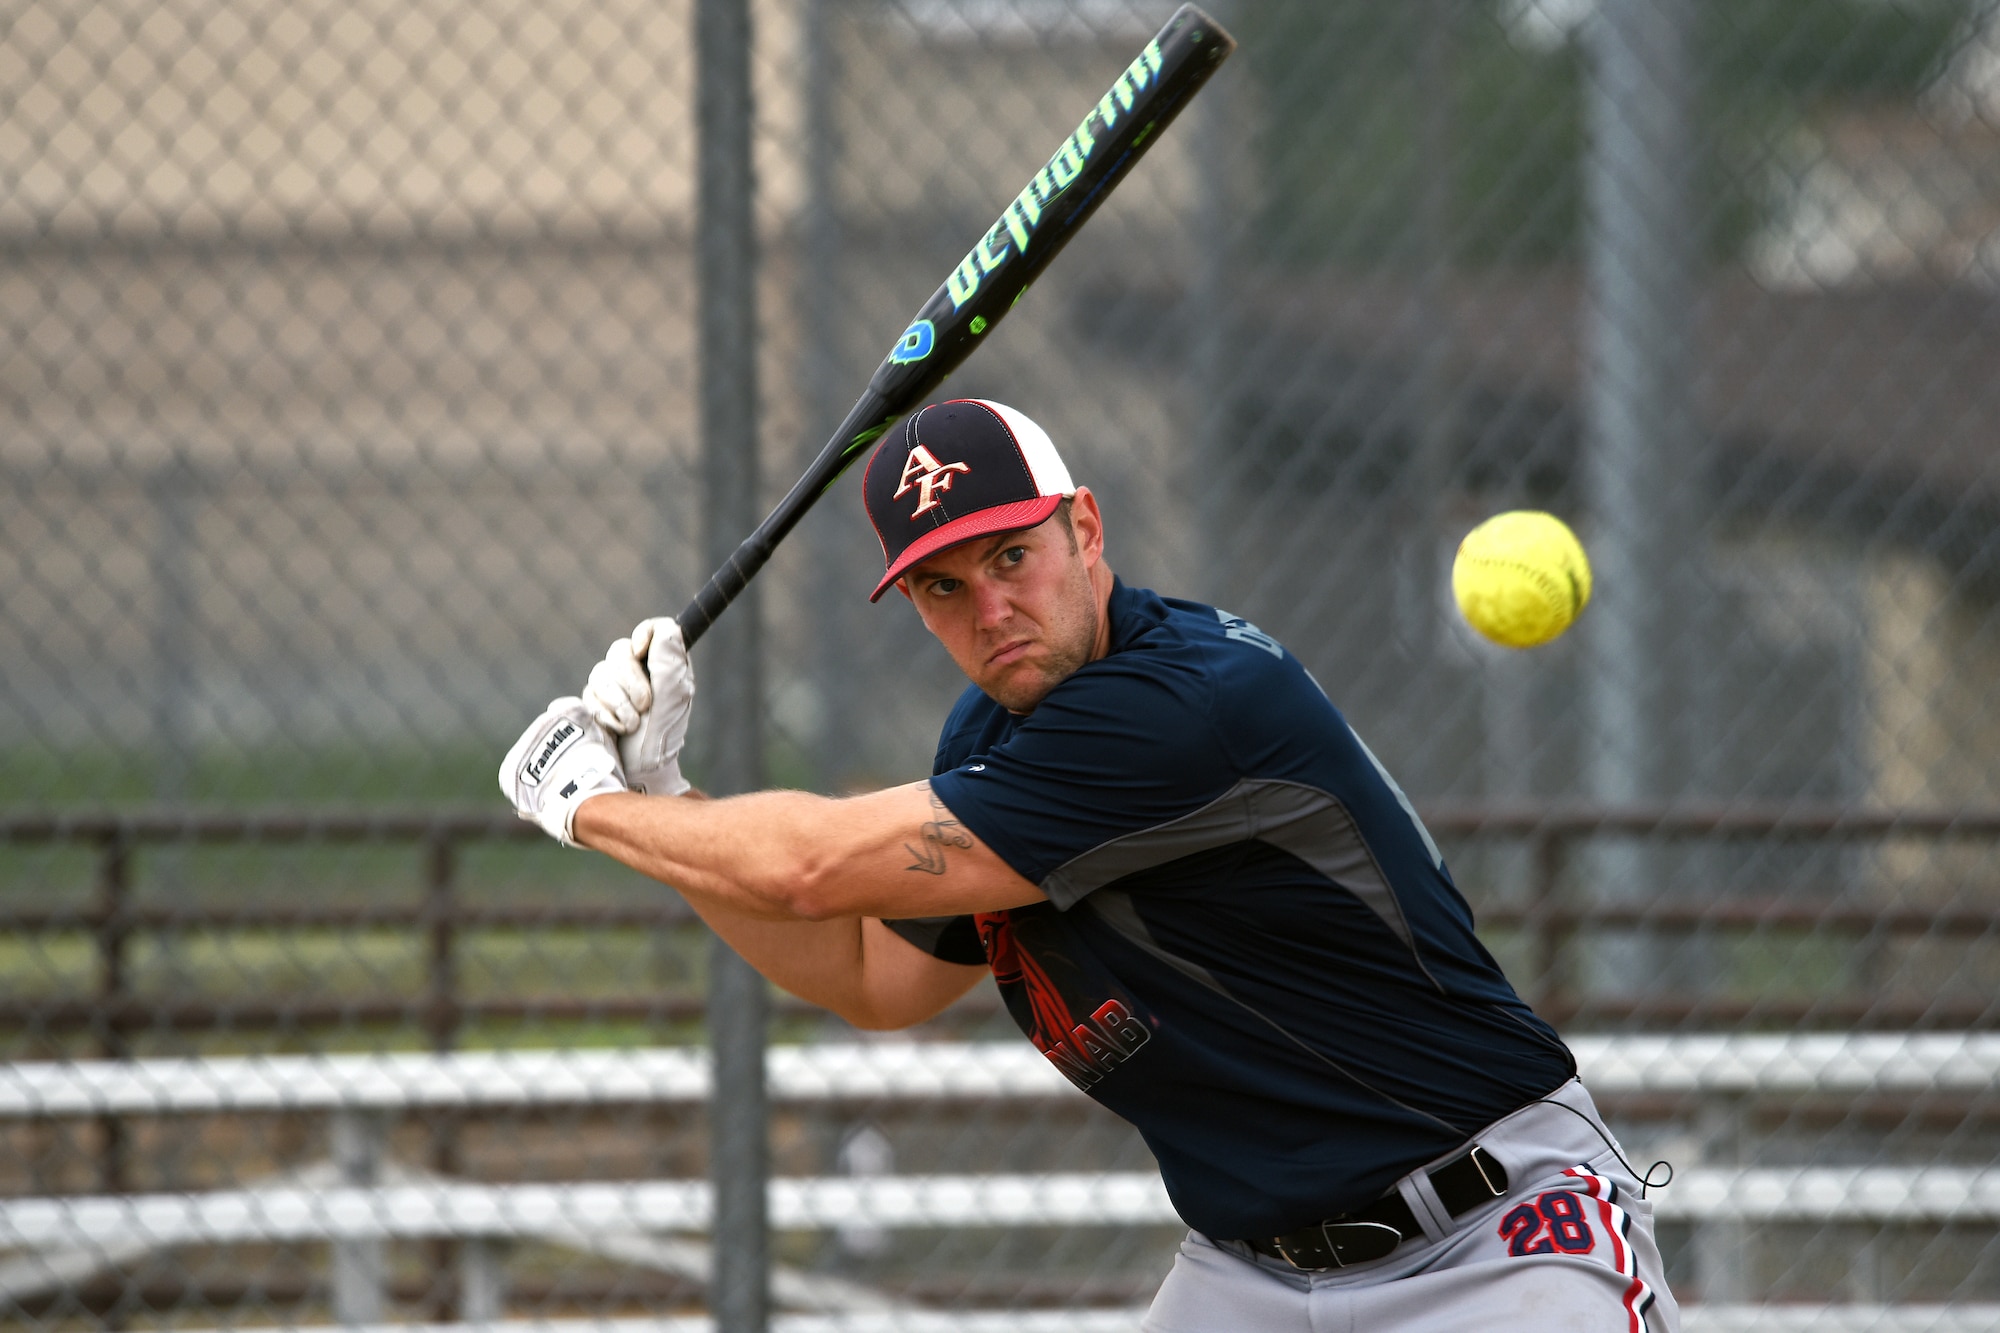 Staff Sgt. Jimmy Fulcher, 341st Security Forces Group evaluator, practices on the baseball field Aug. 17, 2015, at Malmstrom Air Force Base, Mont. Fulcher has been training to try out for the Air Force men's softball team.  (U.S. Air Force photo/Chris Willis) 